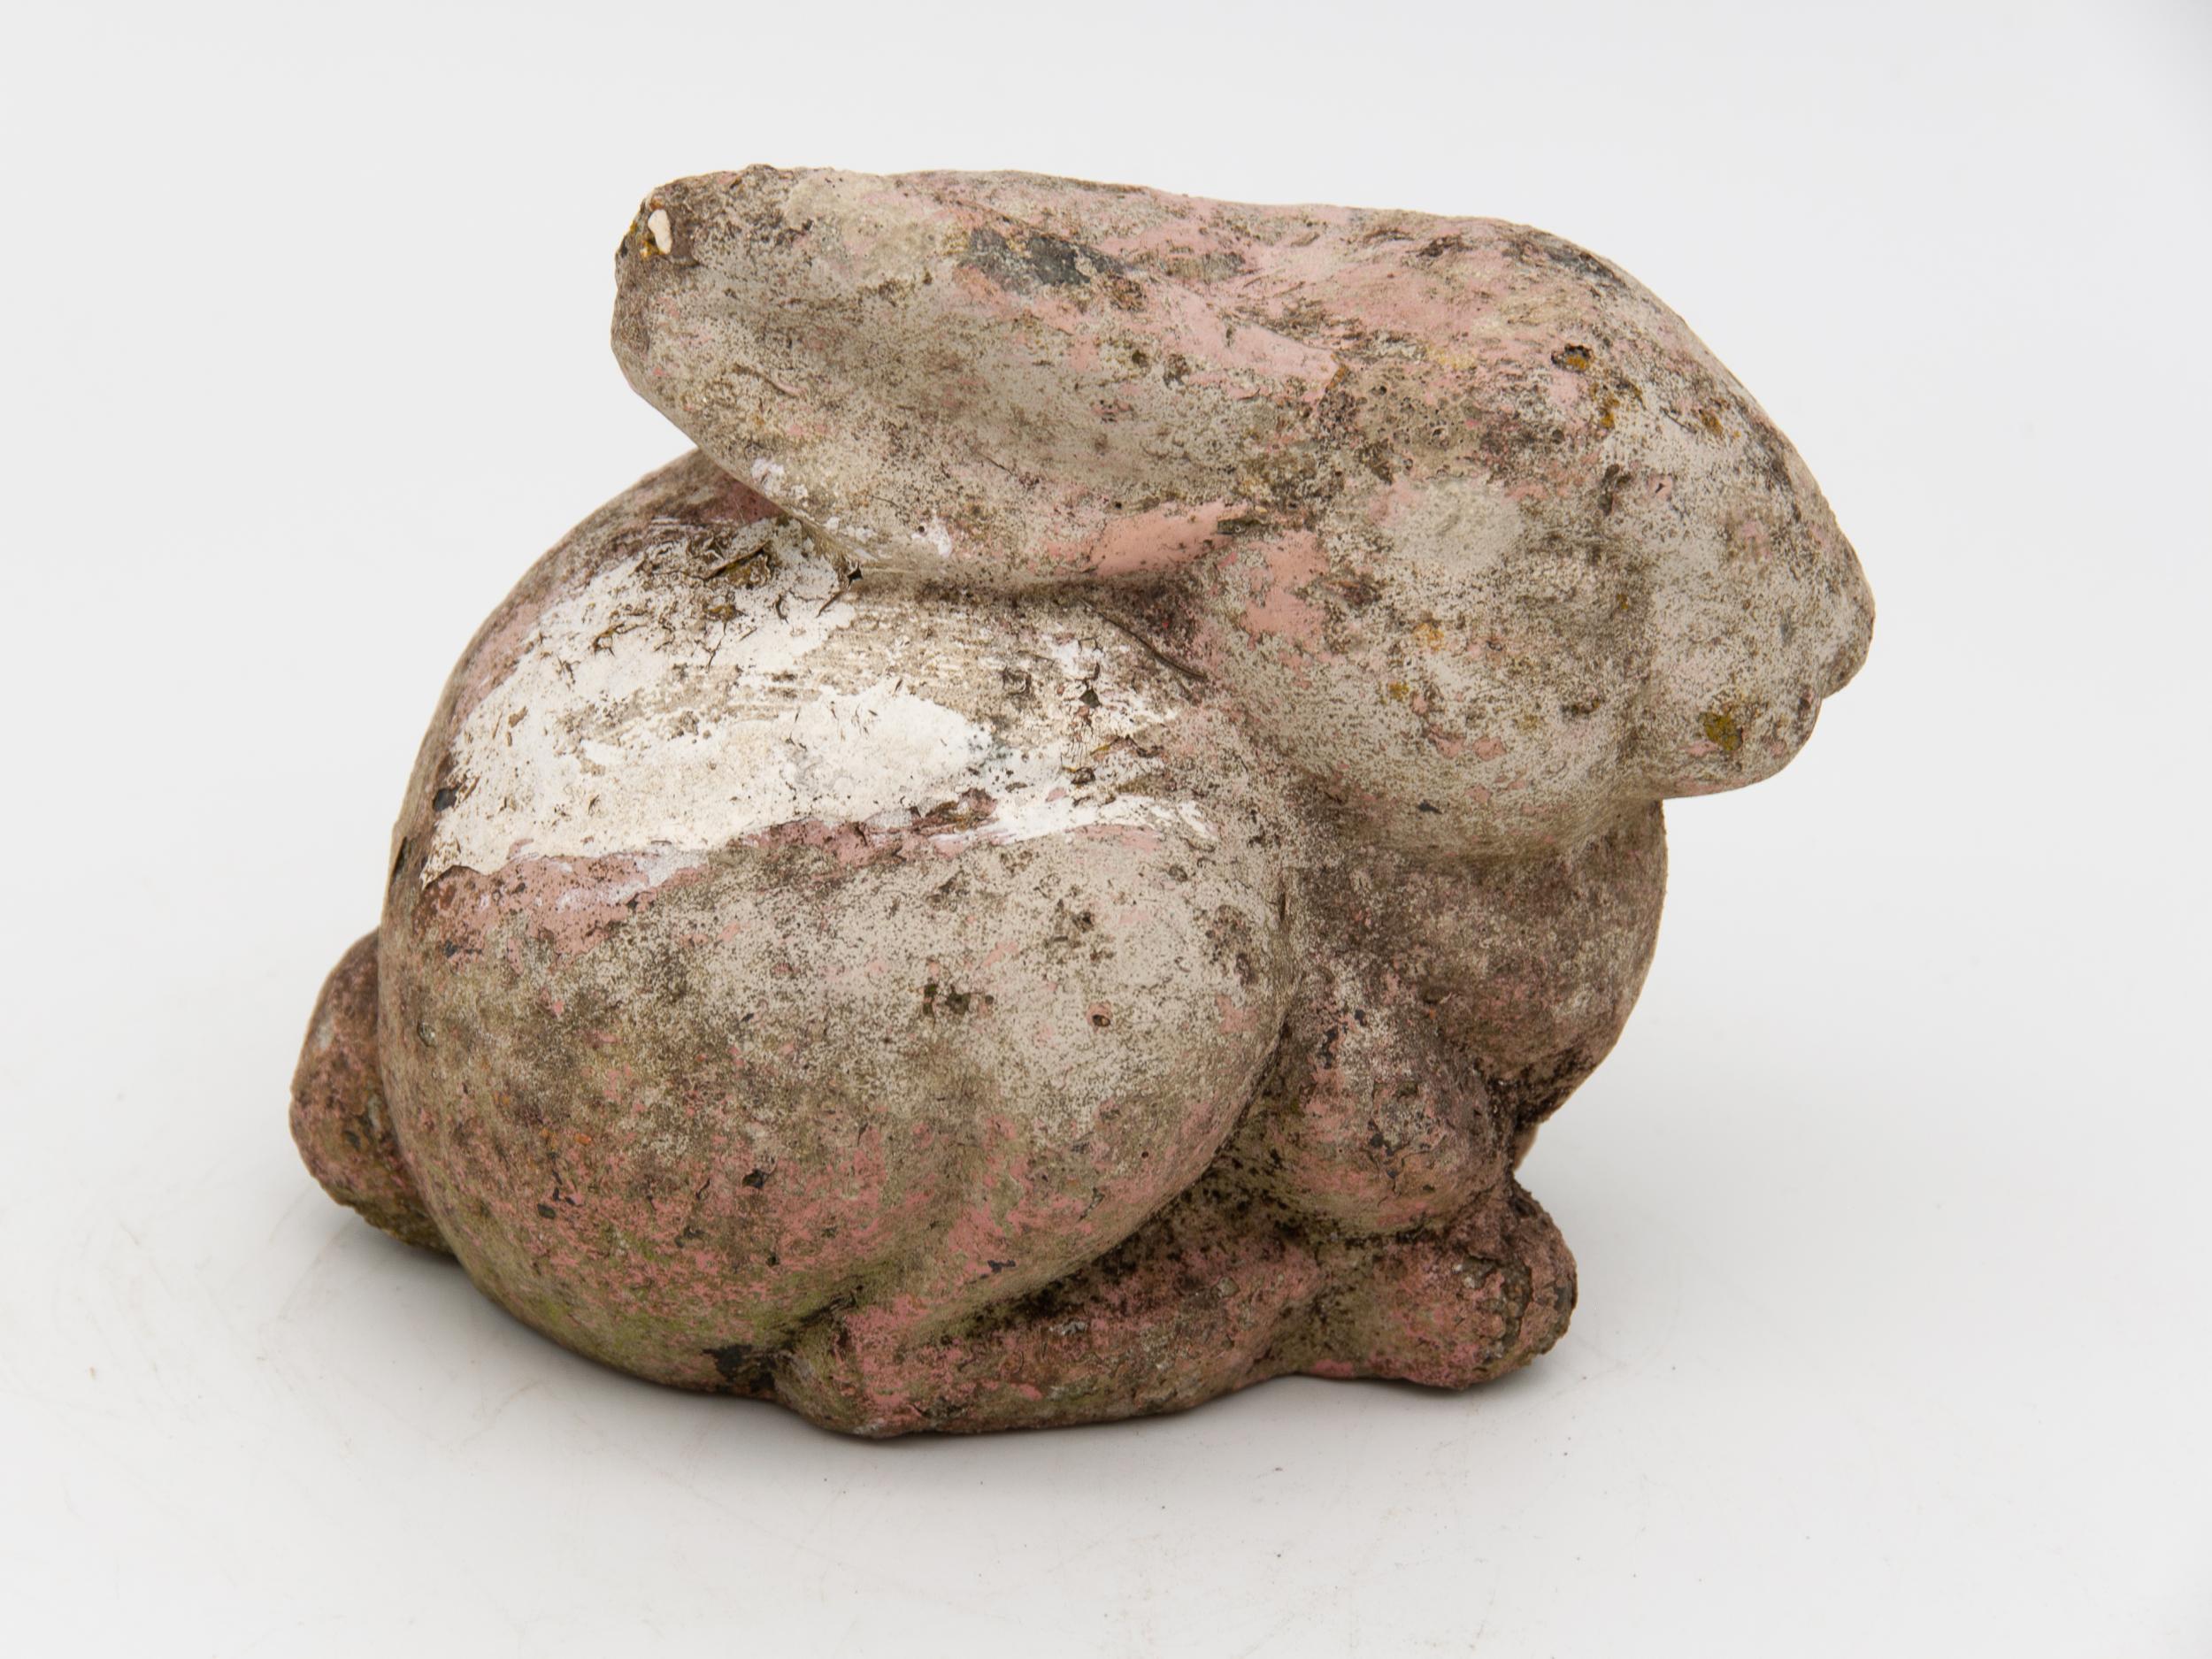 A small stone rabbit or bunny garden ornament with remnants of pale pink paint and a beautiful natural outdoor patina and age. Made from cast stone in the UK, Early 20th century. Wear consistent with age and use.